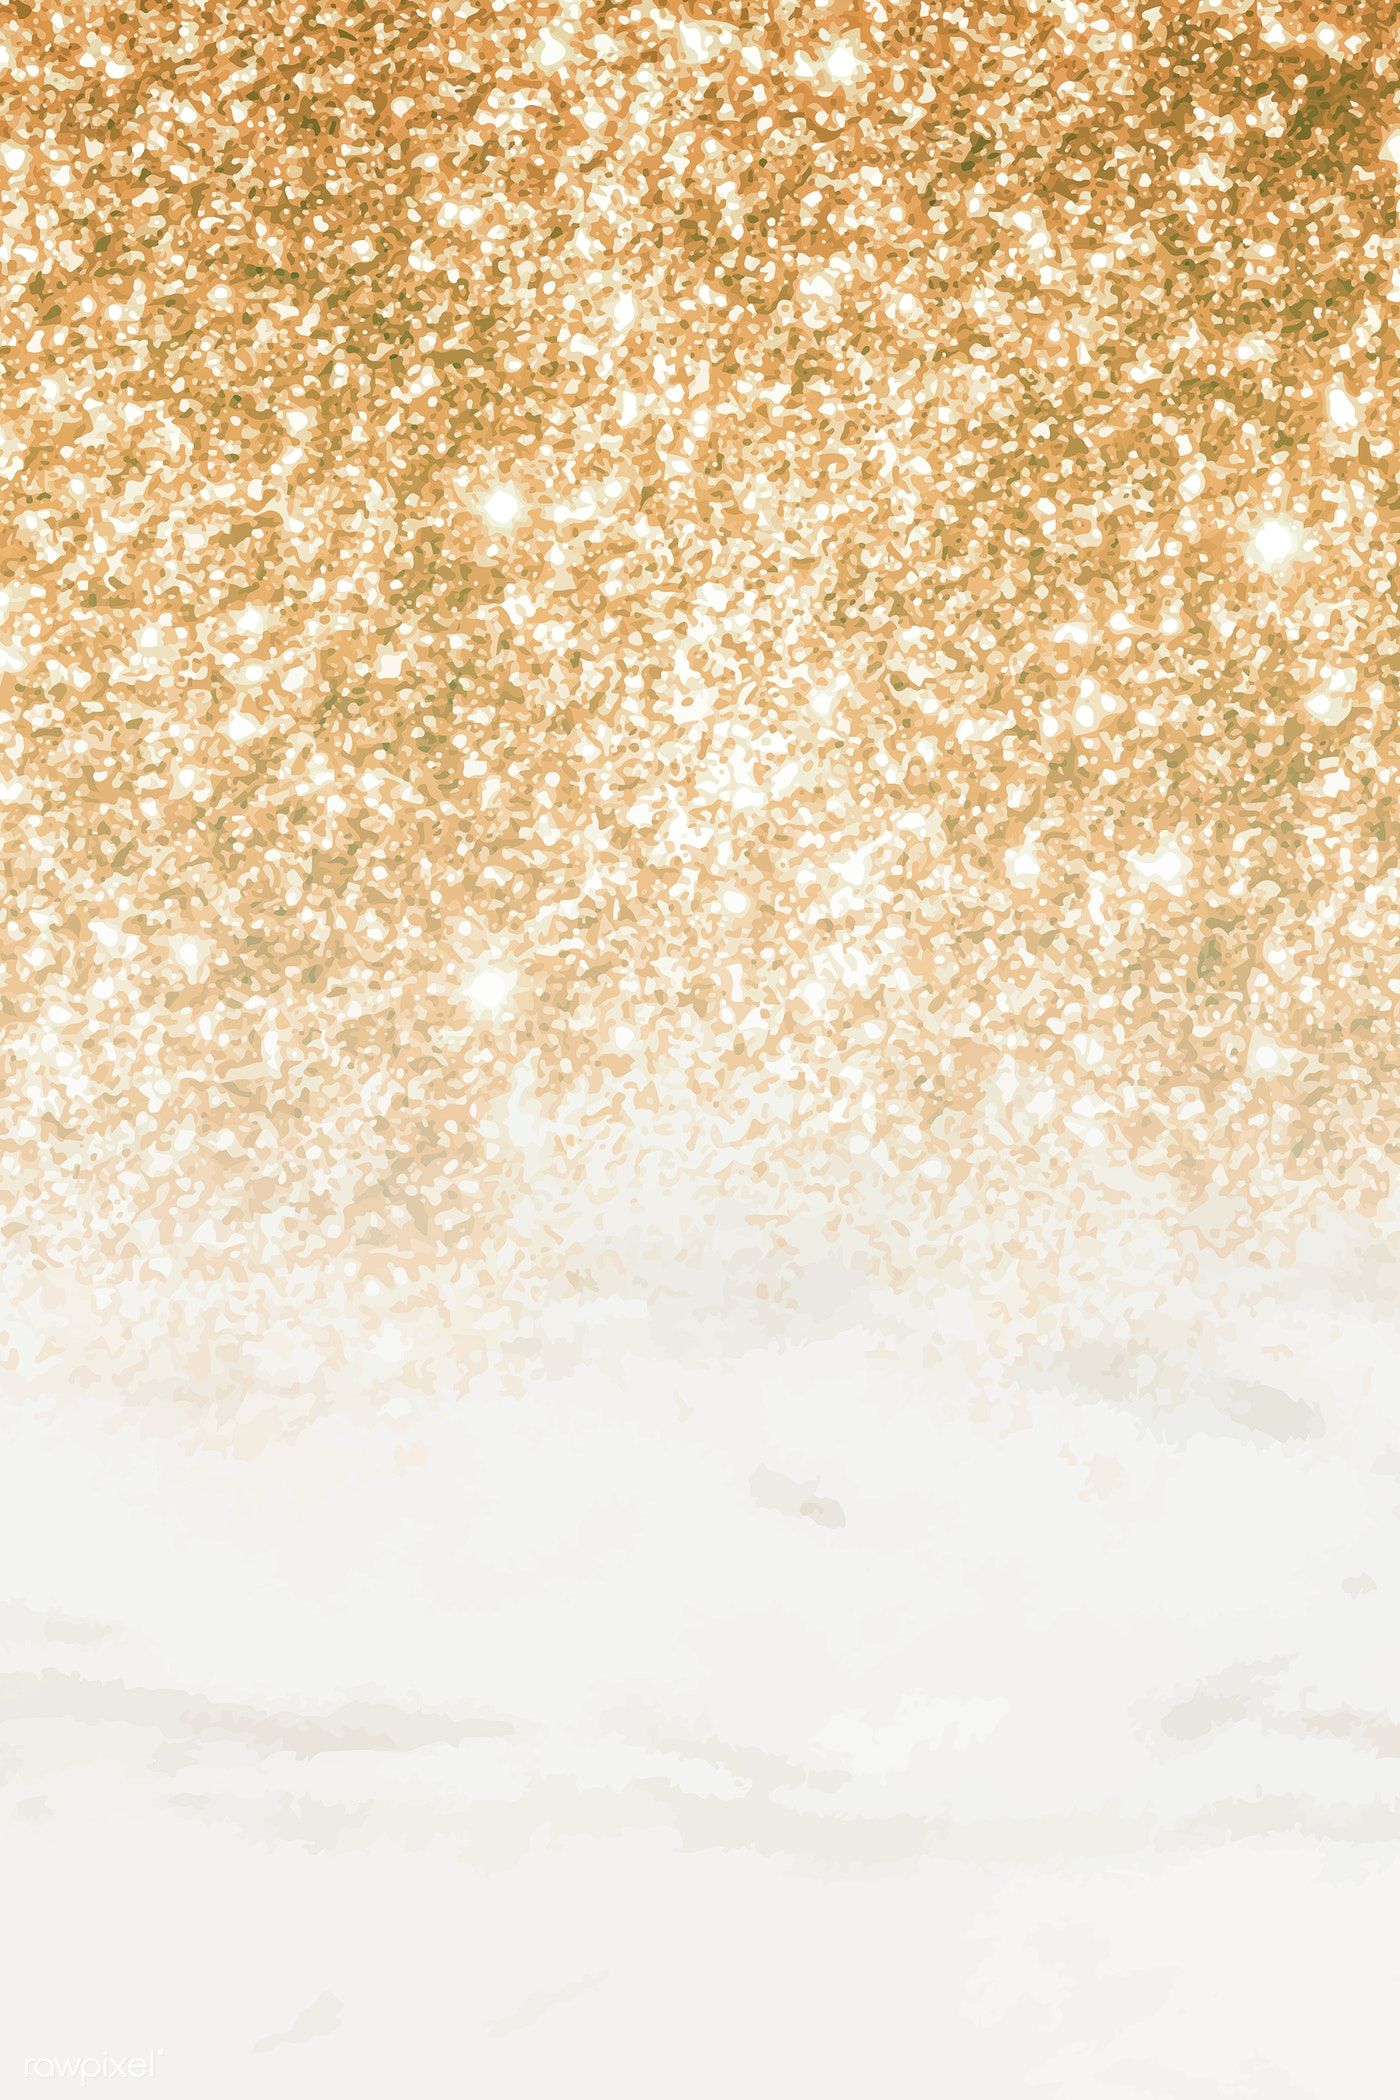 Marble Glitter Gold Background , HD Wallpaper & Backgrounds